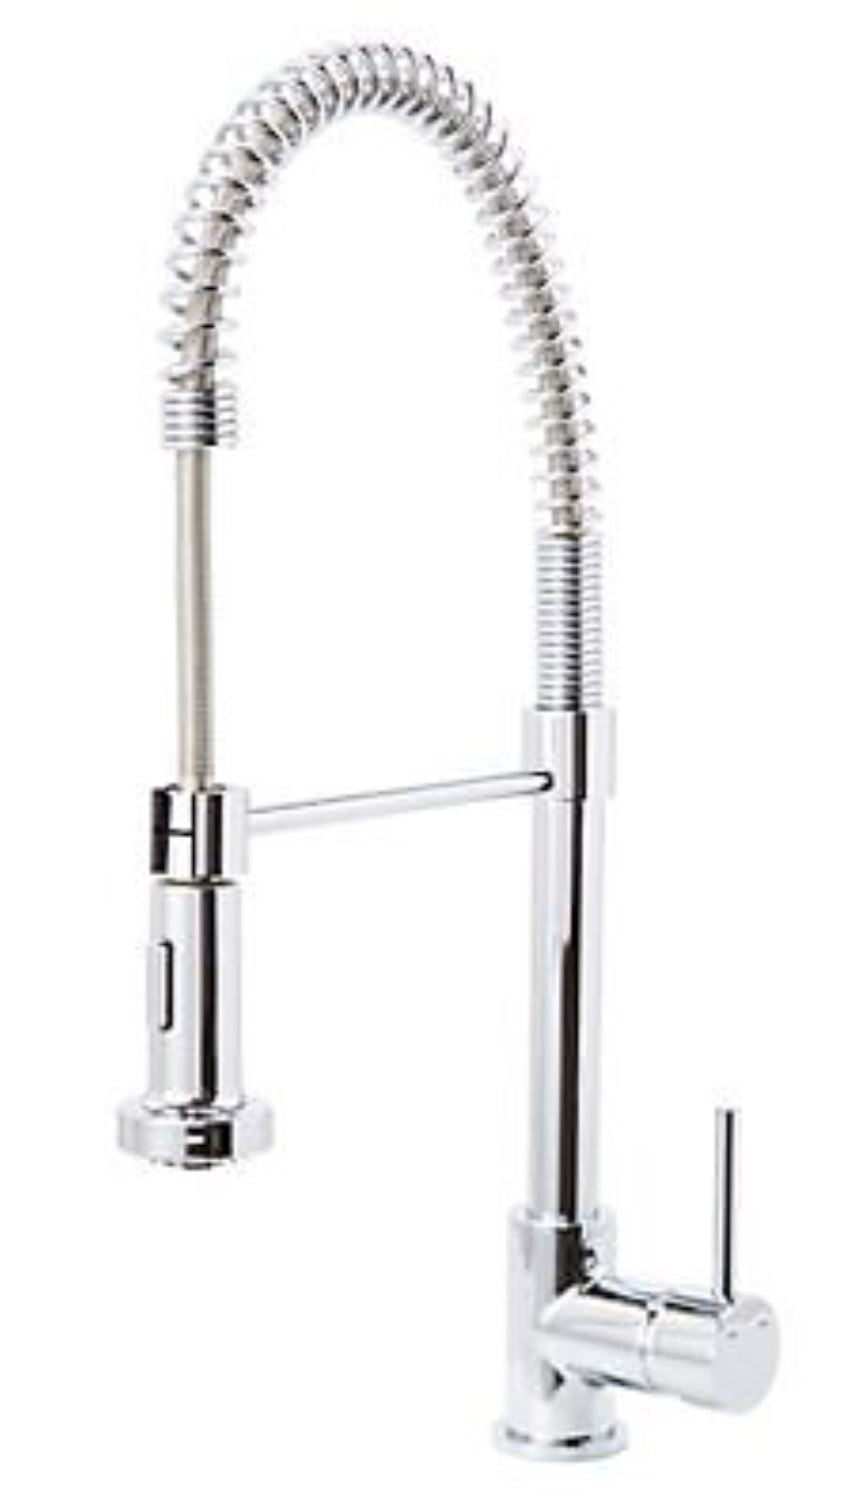 Barbon Chrome effect Modern Kitchen Spring neck Pull Out Mixer tap 9849